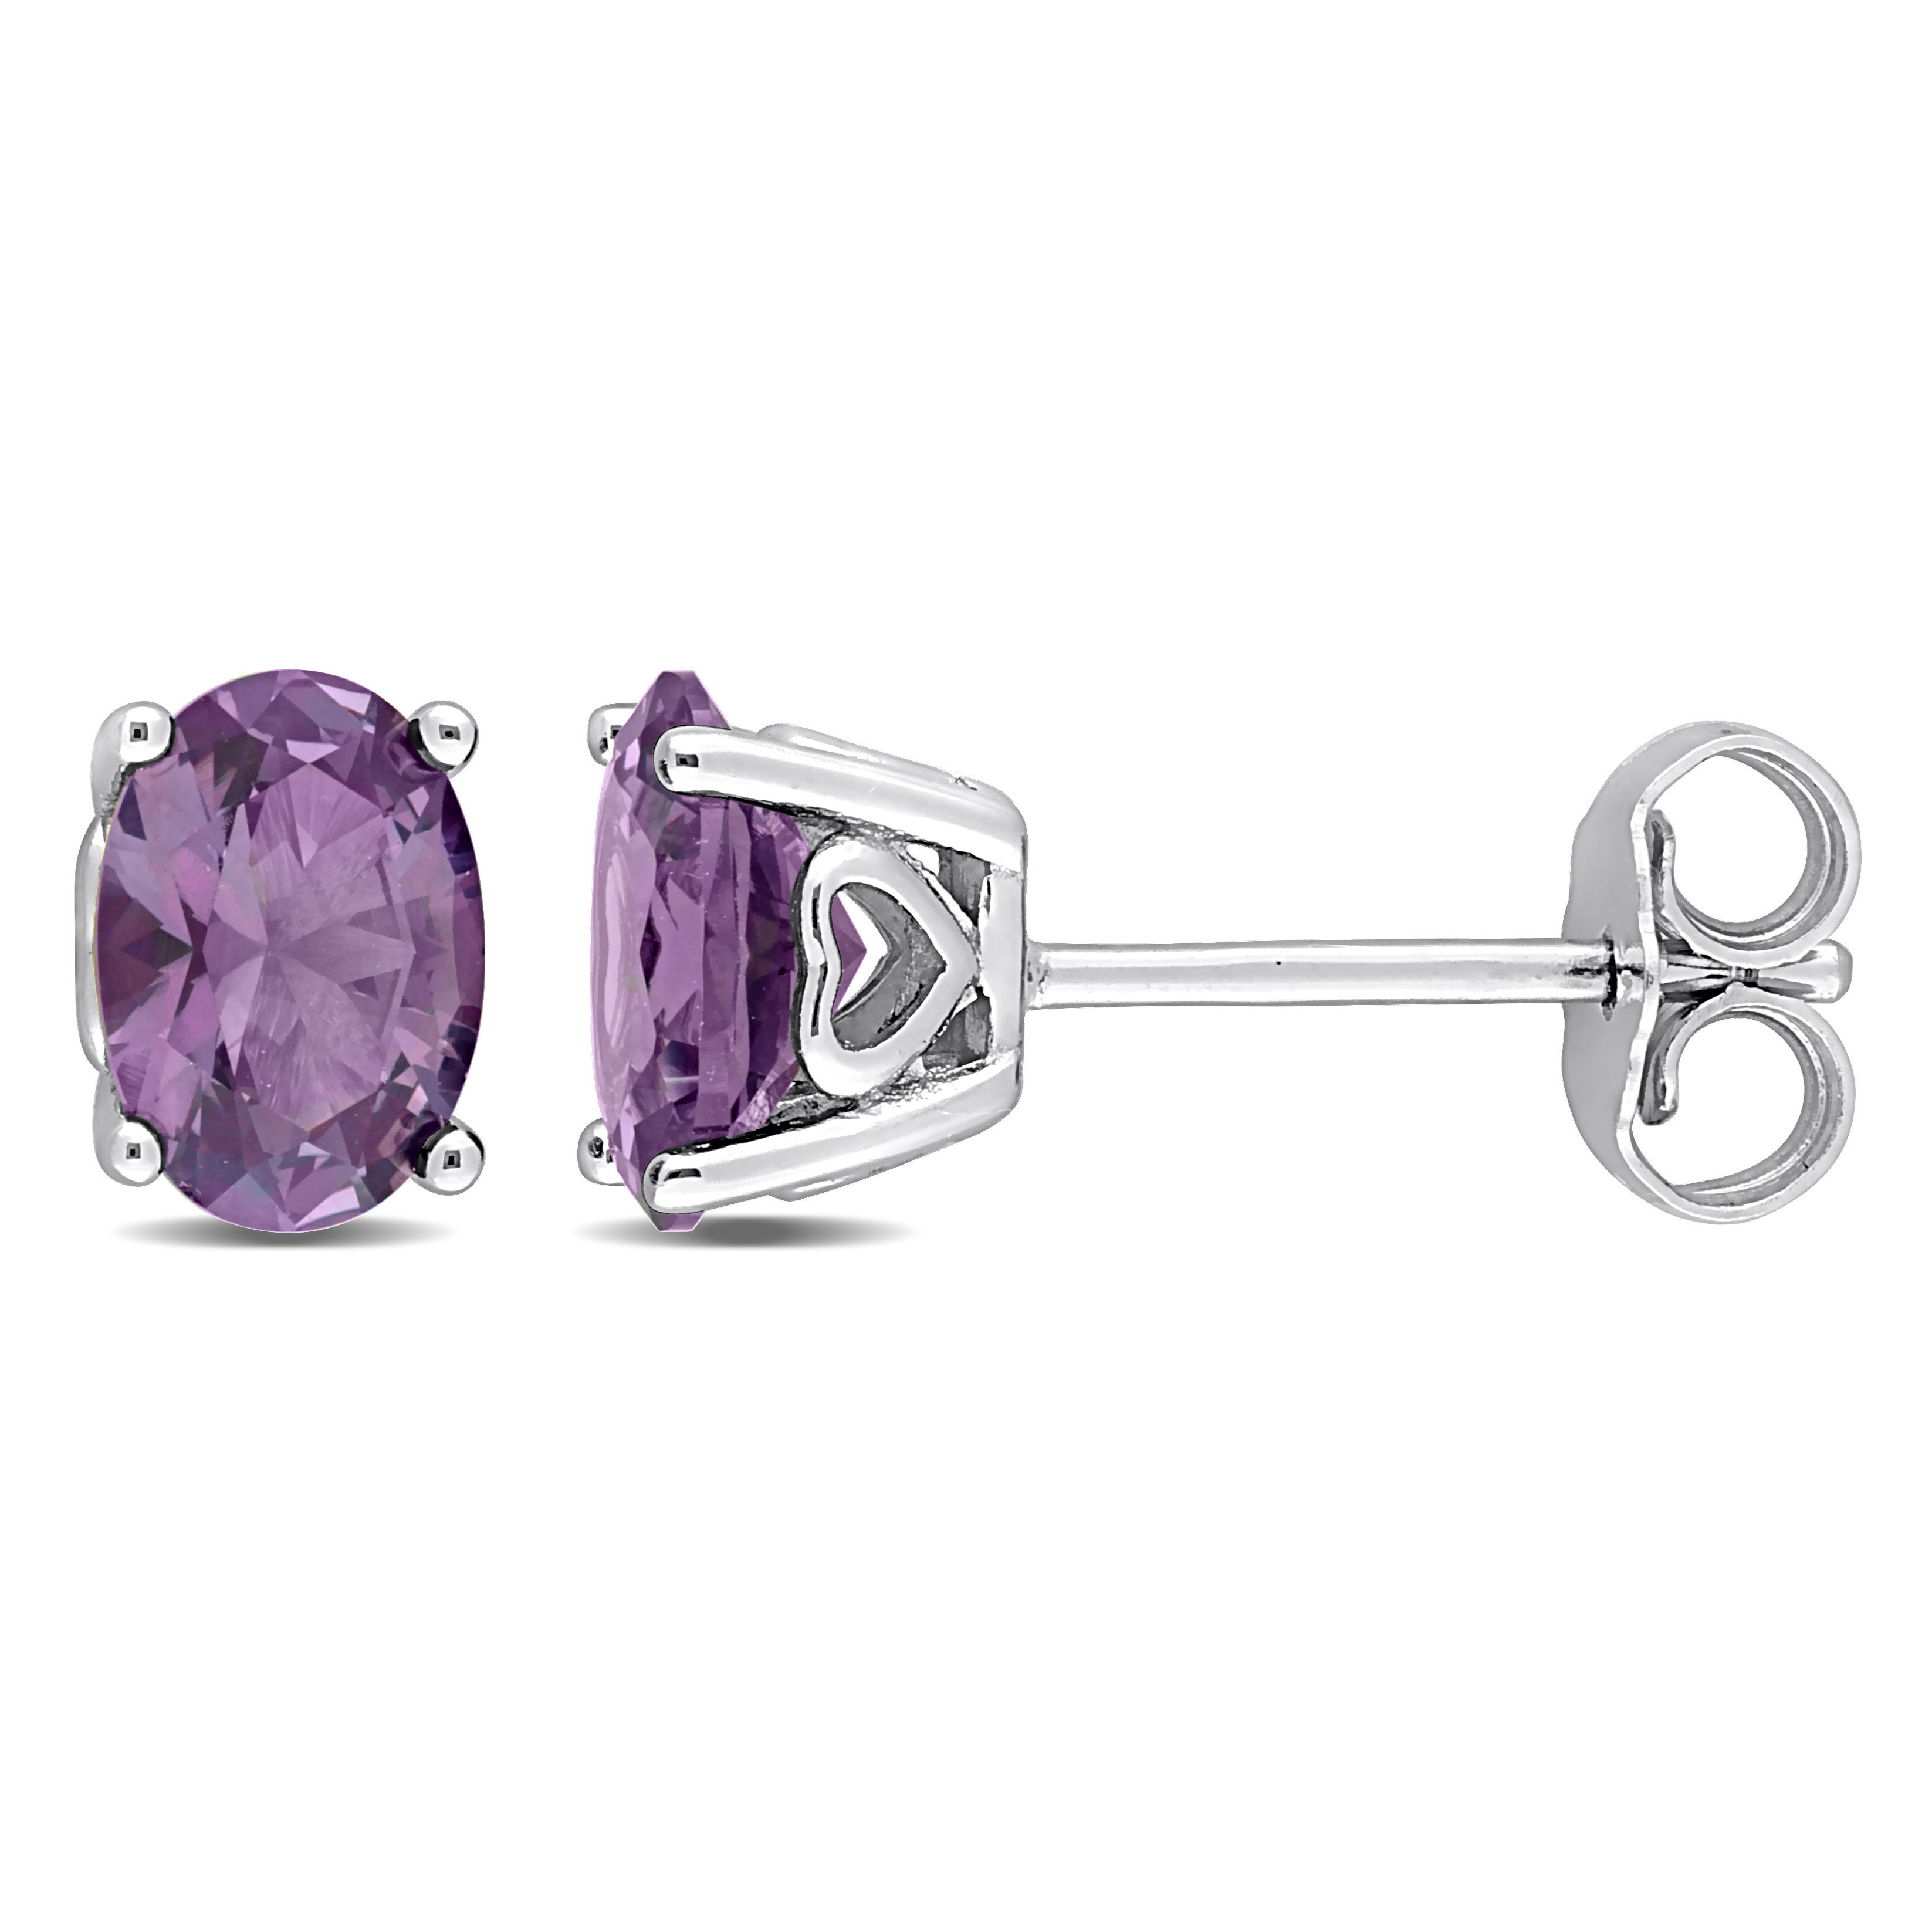 2 1/2 CT TGW Oval Simulated Alexandrite Stud Earrings with Heart Design in Sterling Silver